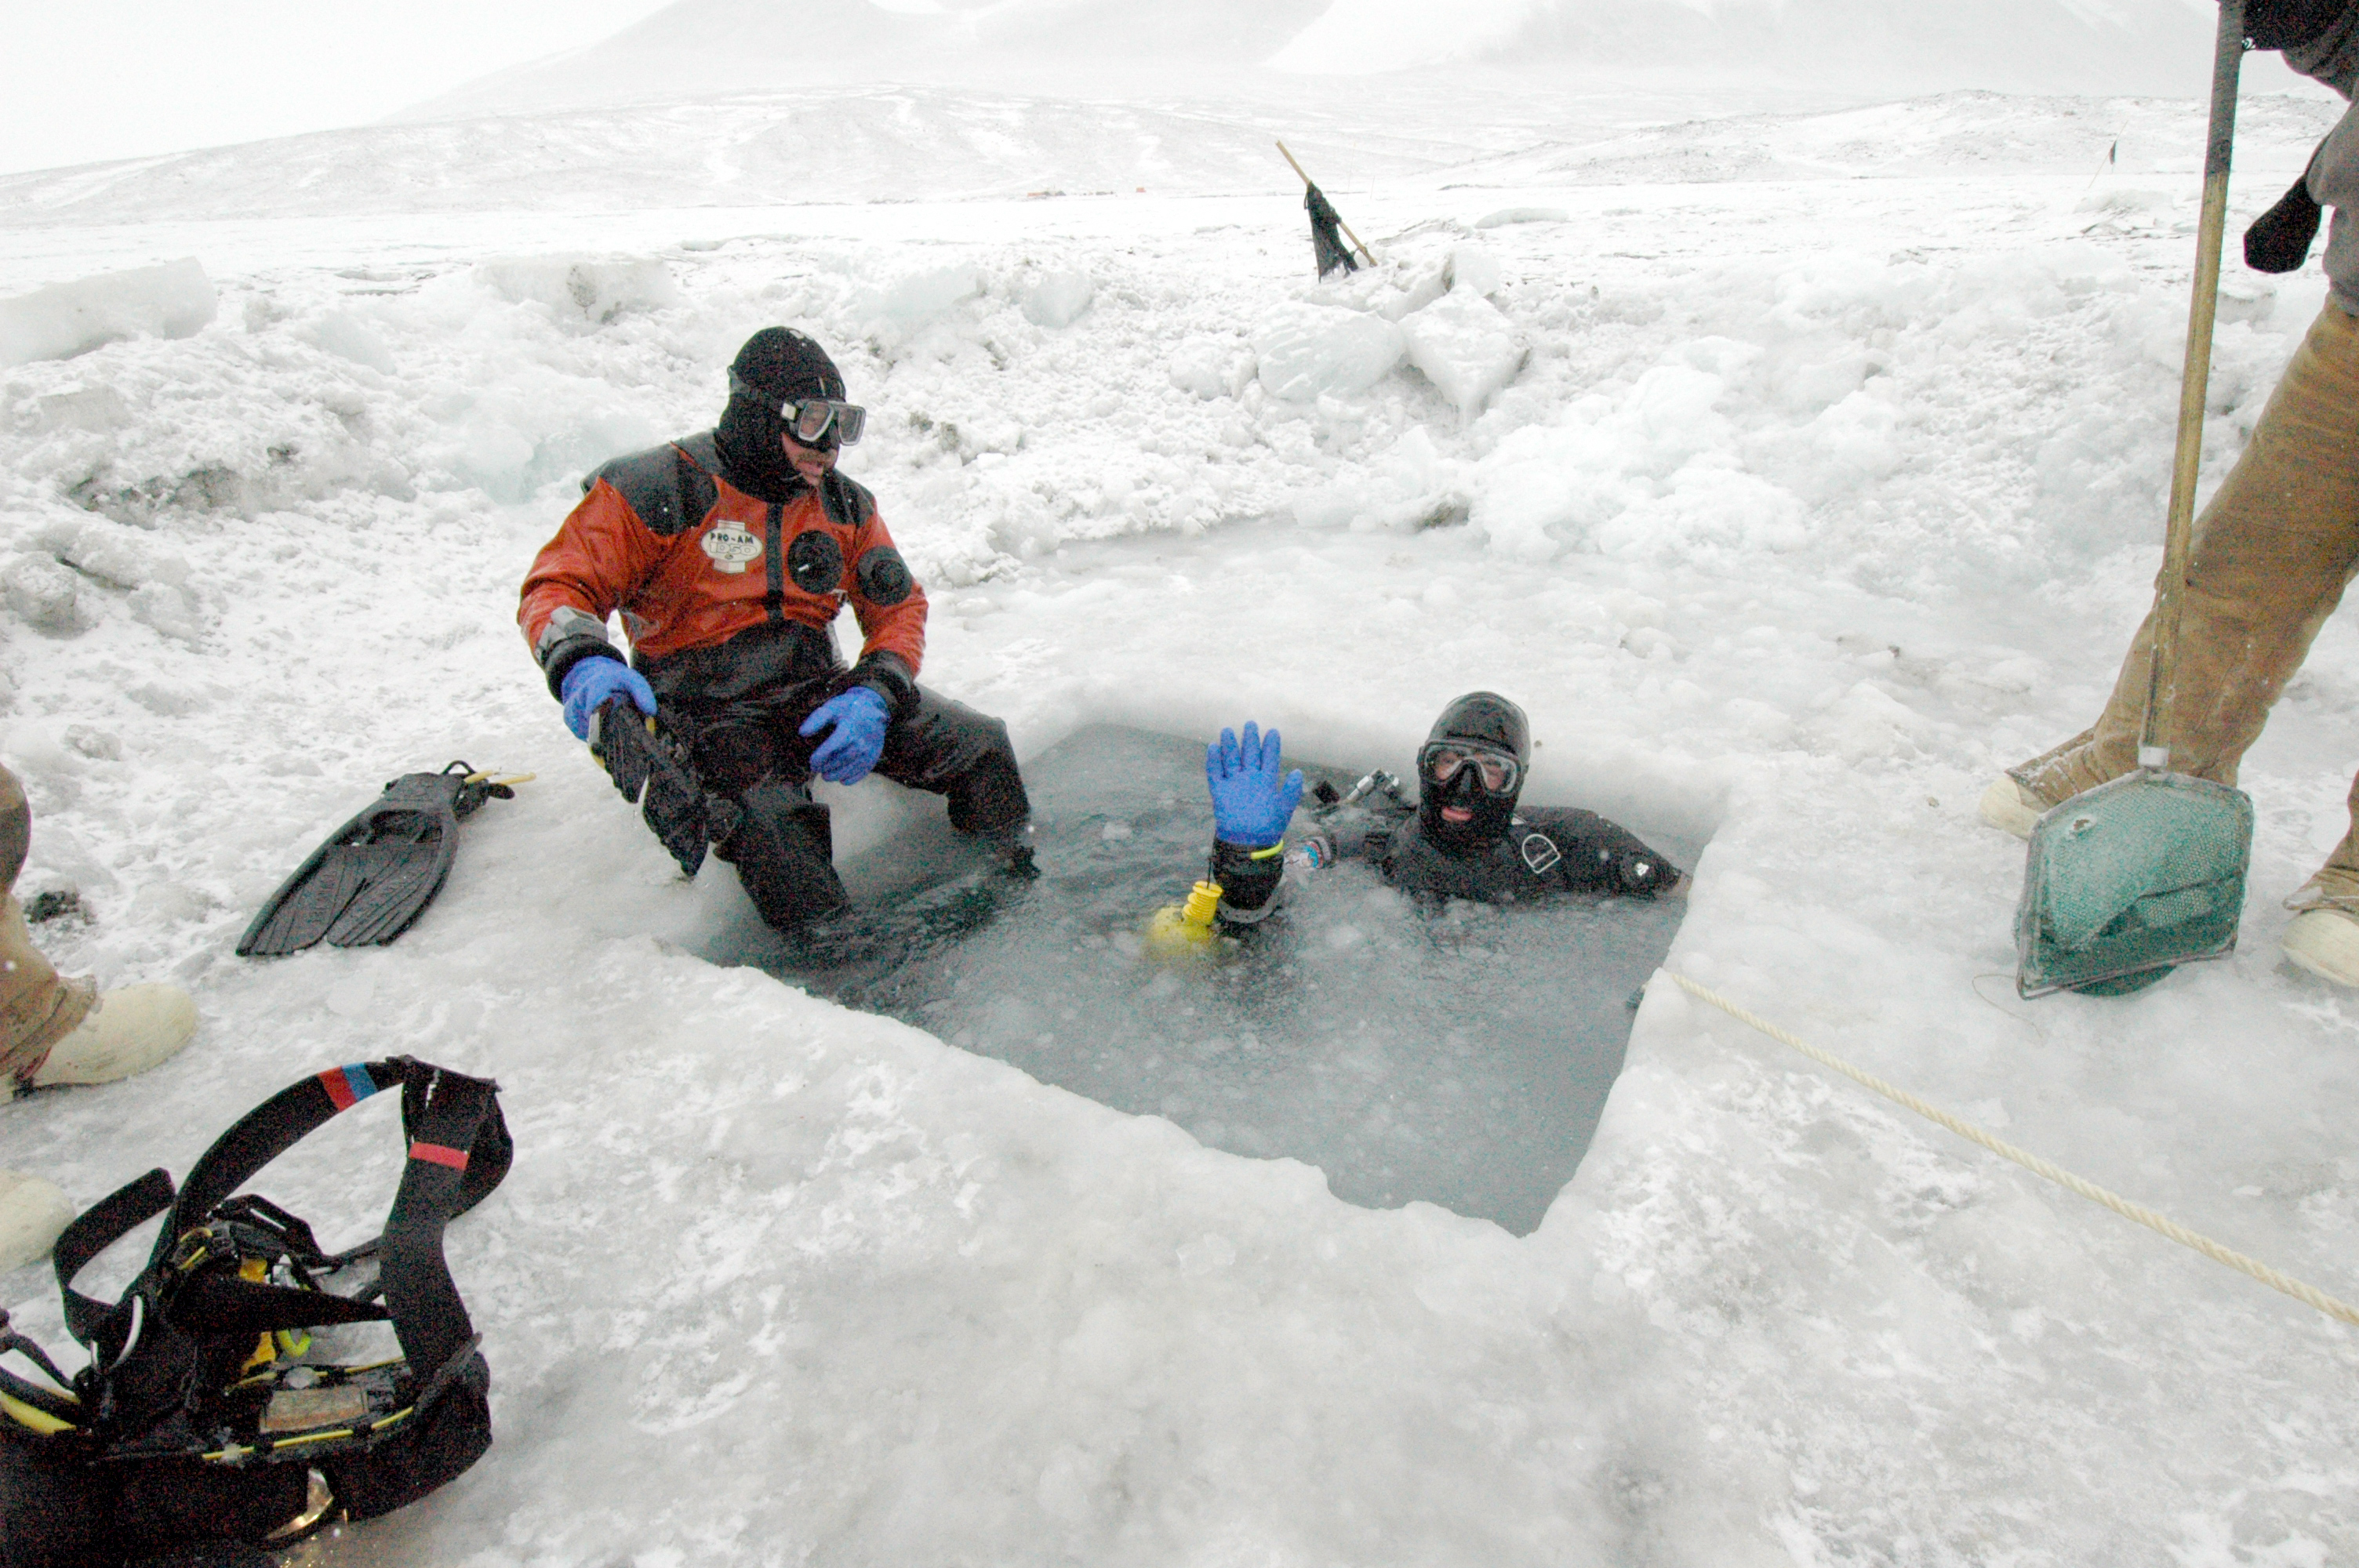 Divers get into an ice hole.